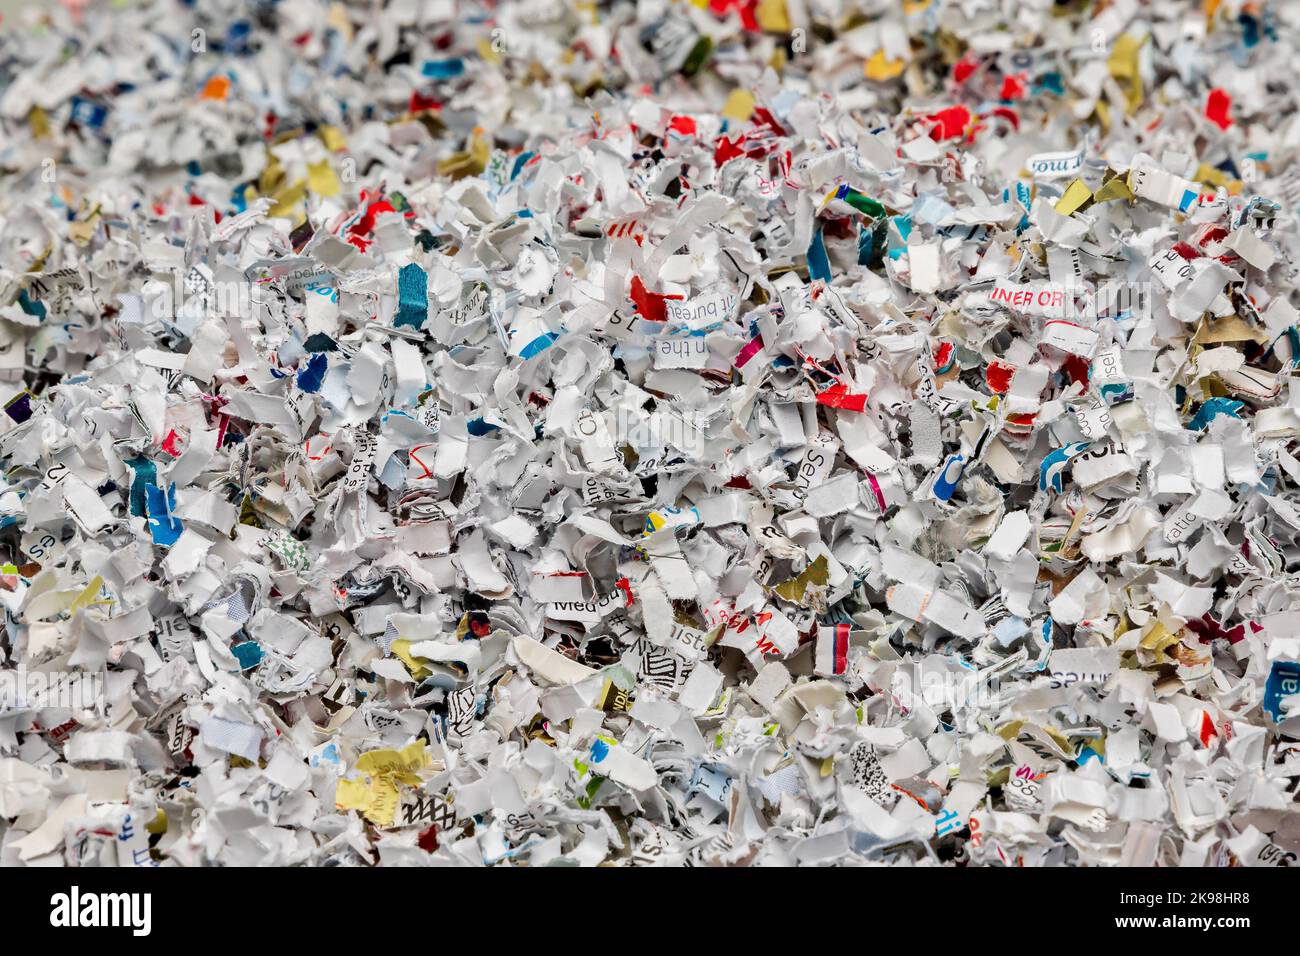 Pile of shredded paper. Document shredding, identity theft and recycling concept Stock Photo